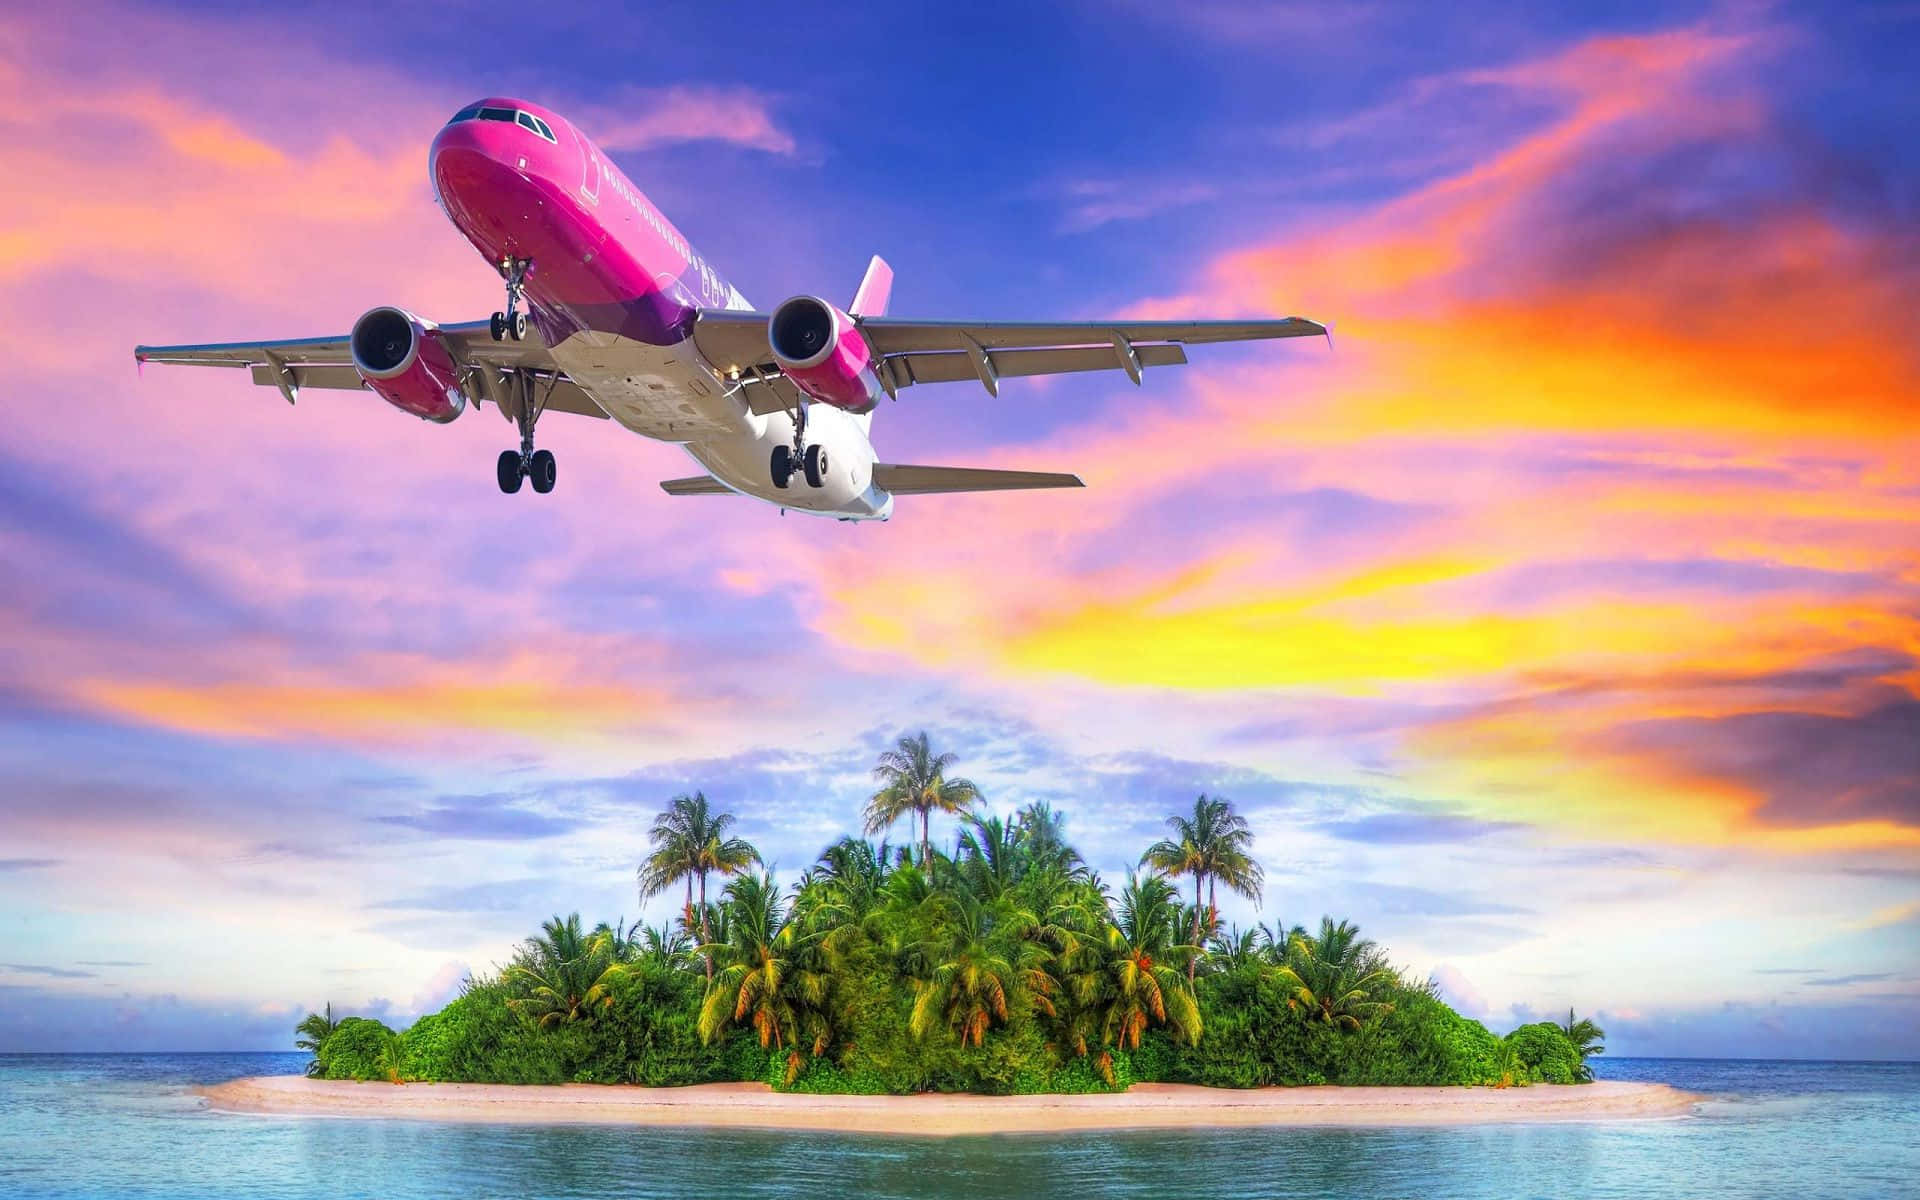 Colorful Sky Island Plane Background Wallpaper